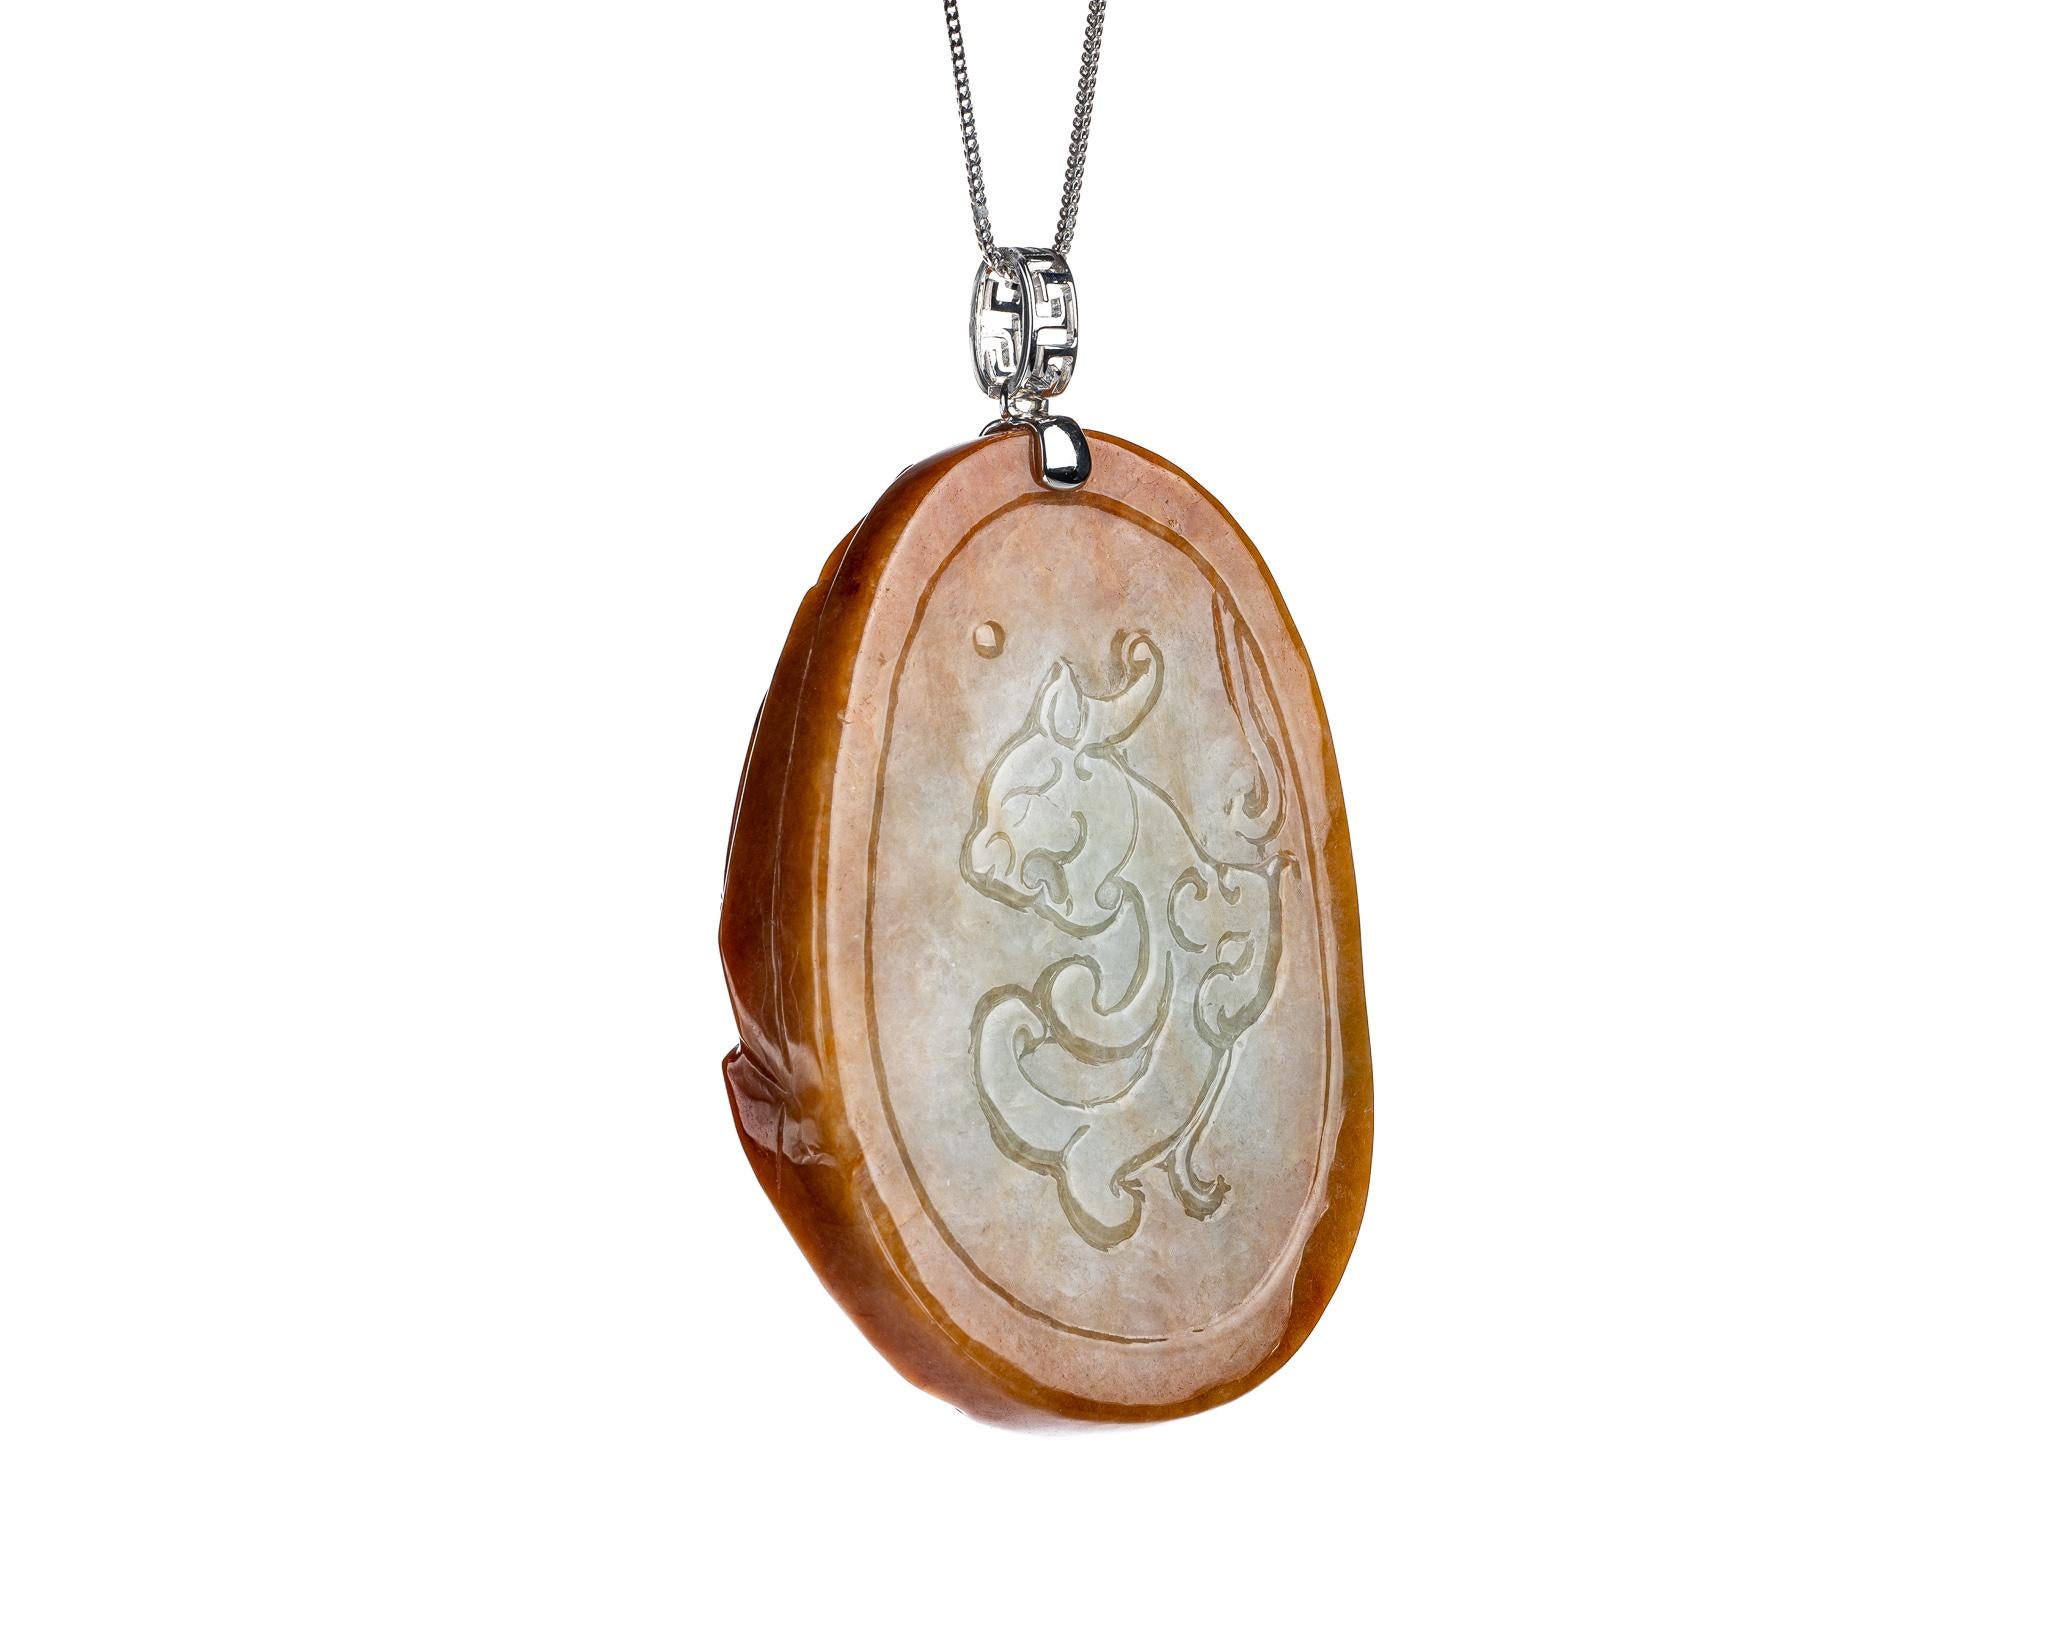 This is an all natural, untreated jadeite jade carved tiger pendant set on an 18K white gold bail.  The carved tiger symbolizes great power, courage and personal strength. 
  
It measures 1.78 inches (45.3mm) x 2.56 inches (65mm) with thickness of